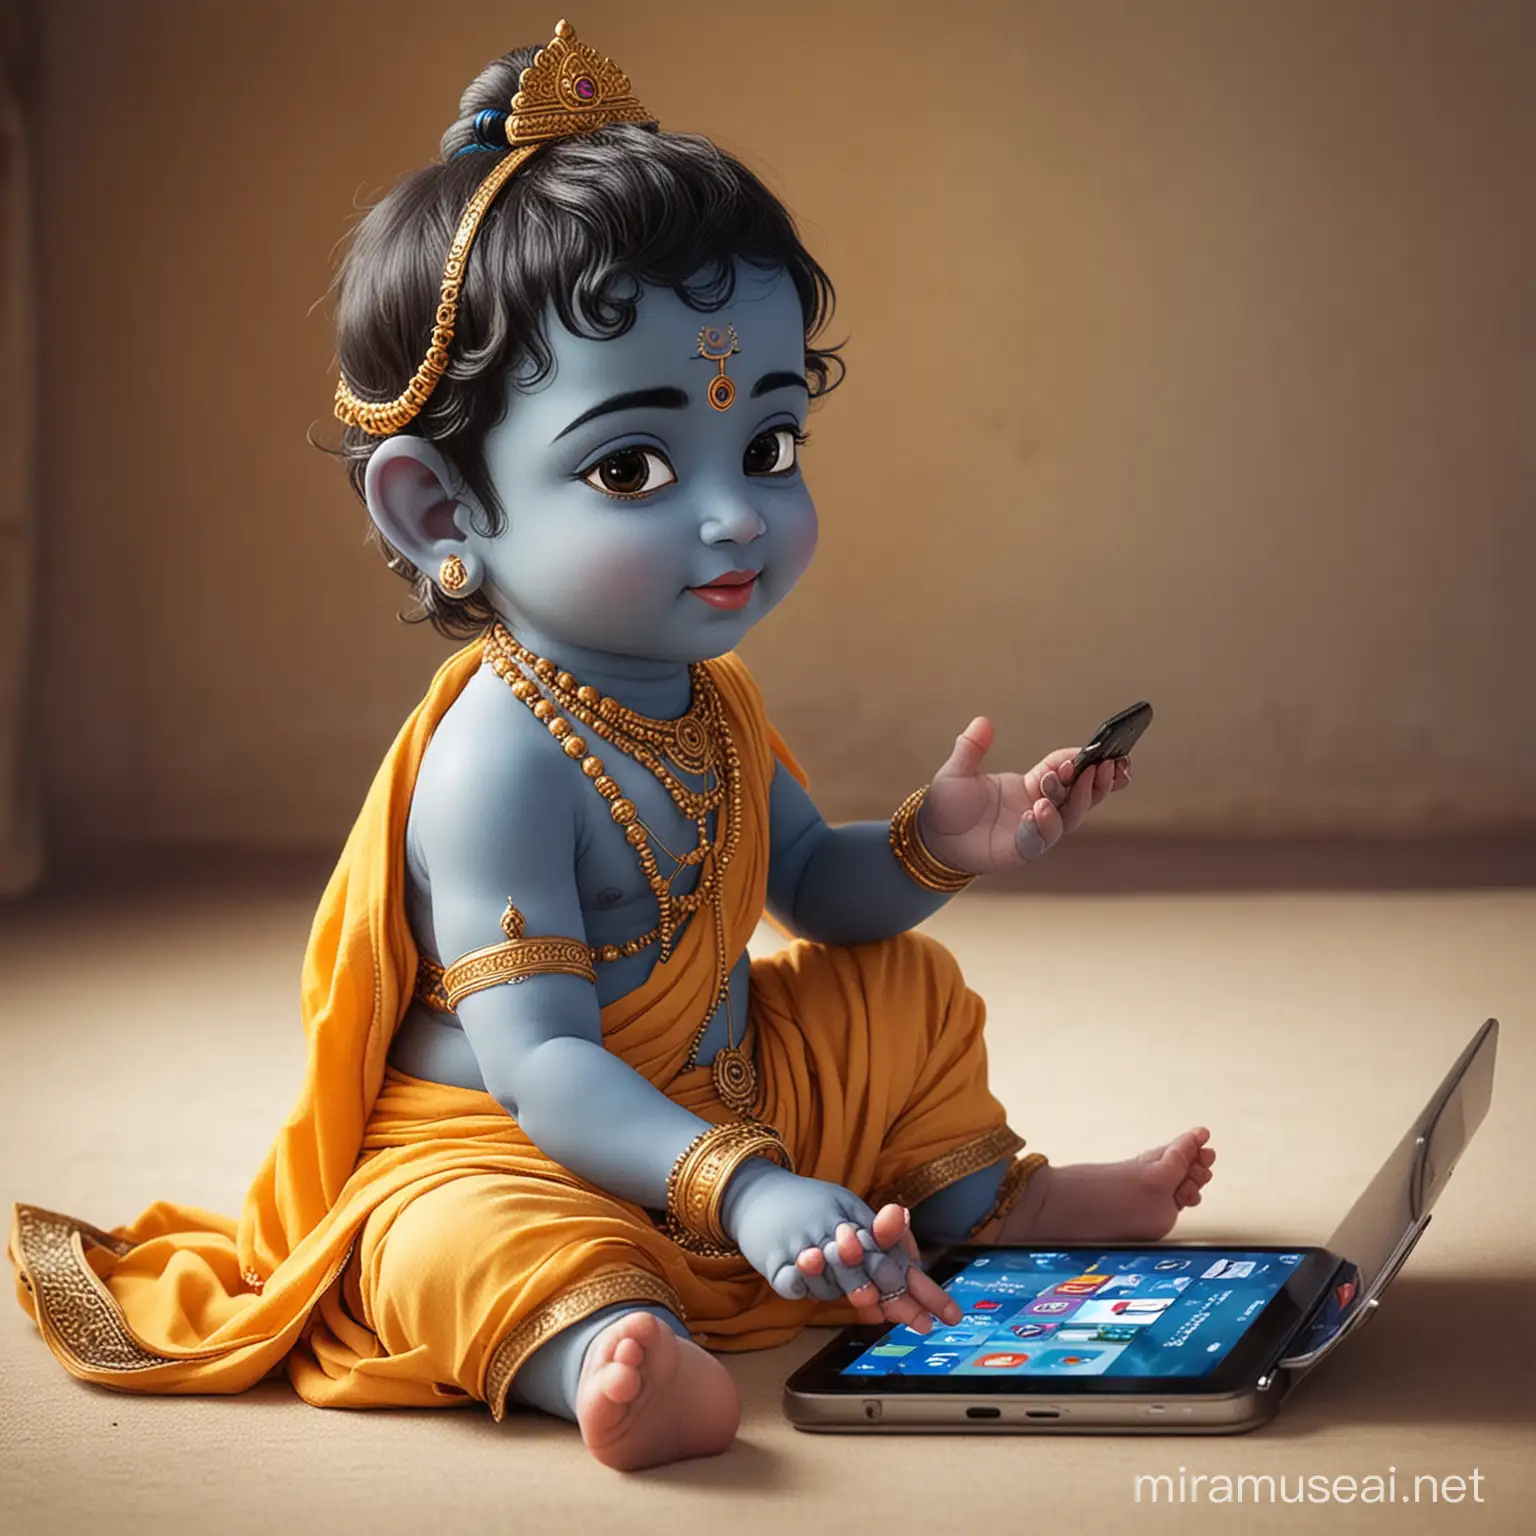 Playful Little Krishna Engaging with Social Media Apps